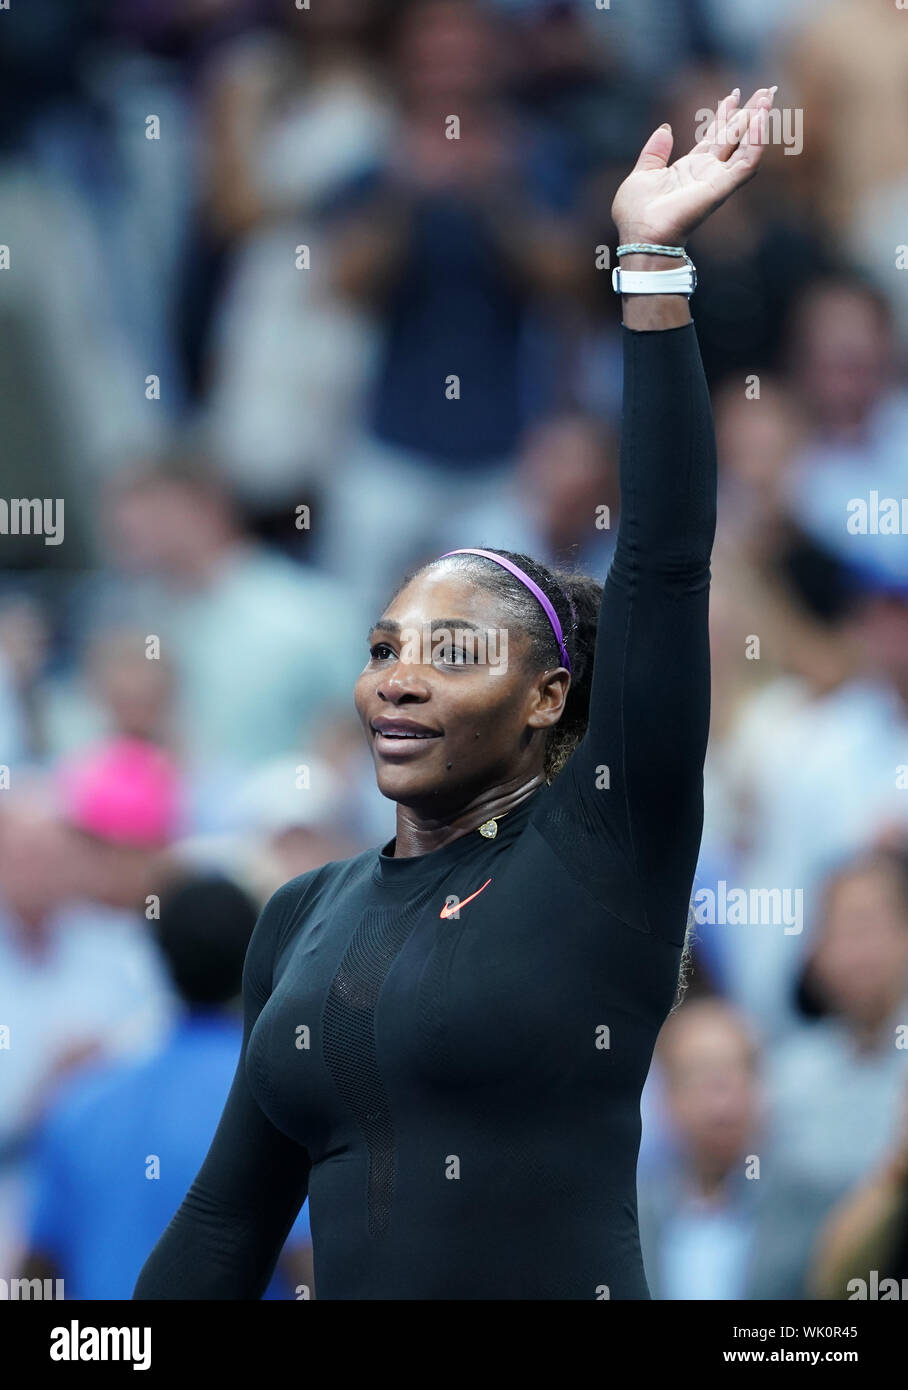 New York, USA. 3rd Sep, 2019. Serena Williams gestures to audience after women's singles quarterfinal match between Wang Qiang of China and Serena Williams of the United States at the 2019 US Open in New York, the United States, Sept. 3, 2019. Credit: Liu Jie/Xinhua/Alamy Live News Stock Photo